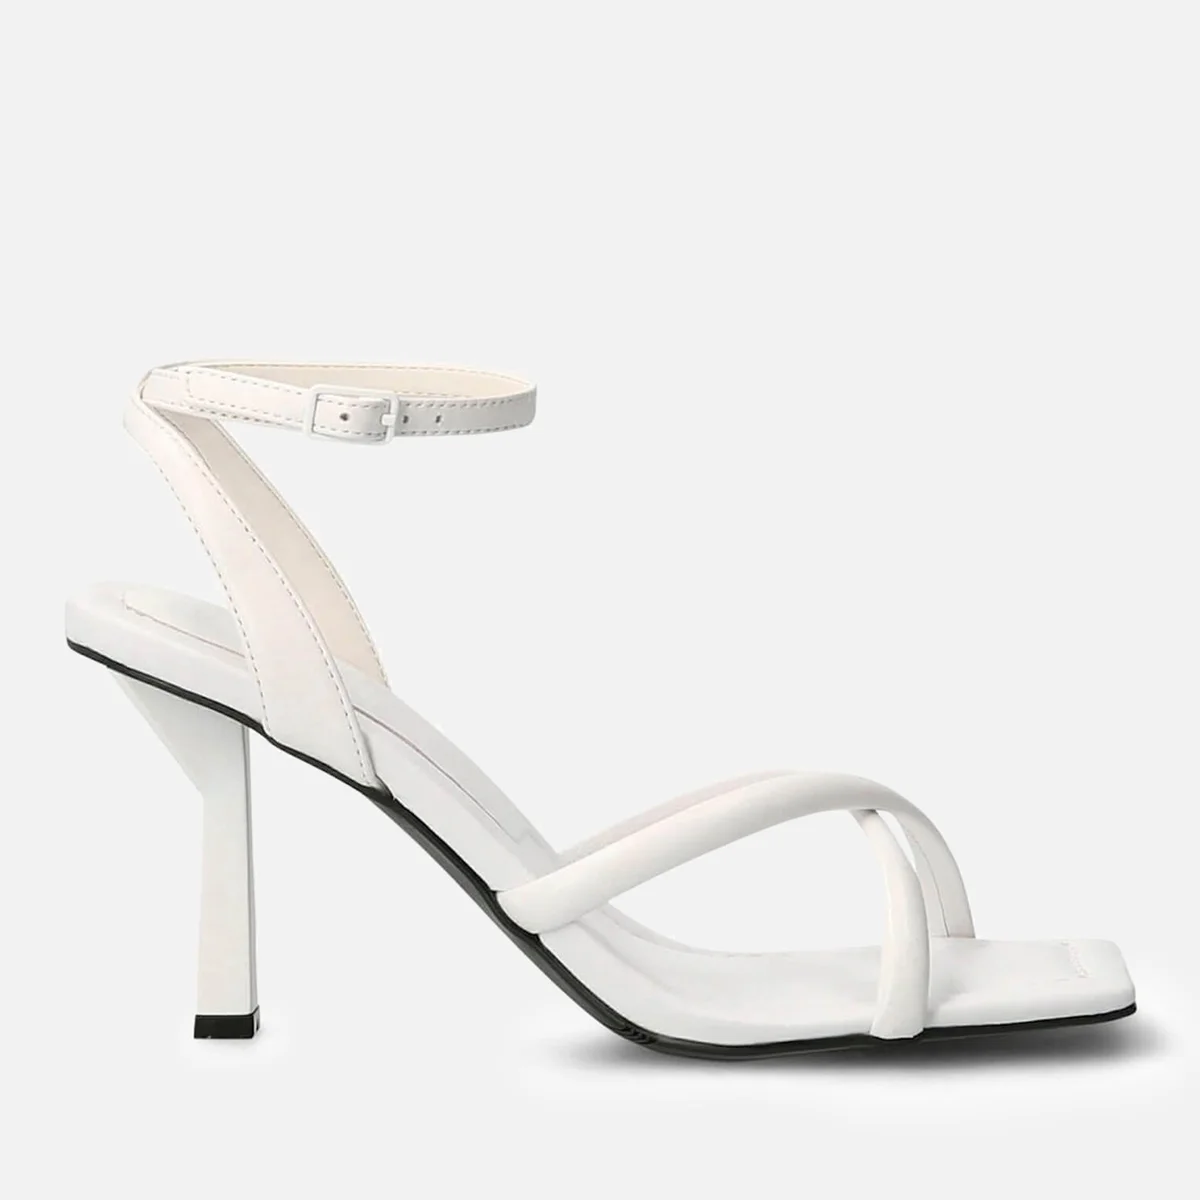 Guess Women's Dezza Leather Heeled Sandals - White Image 1